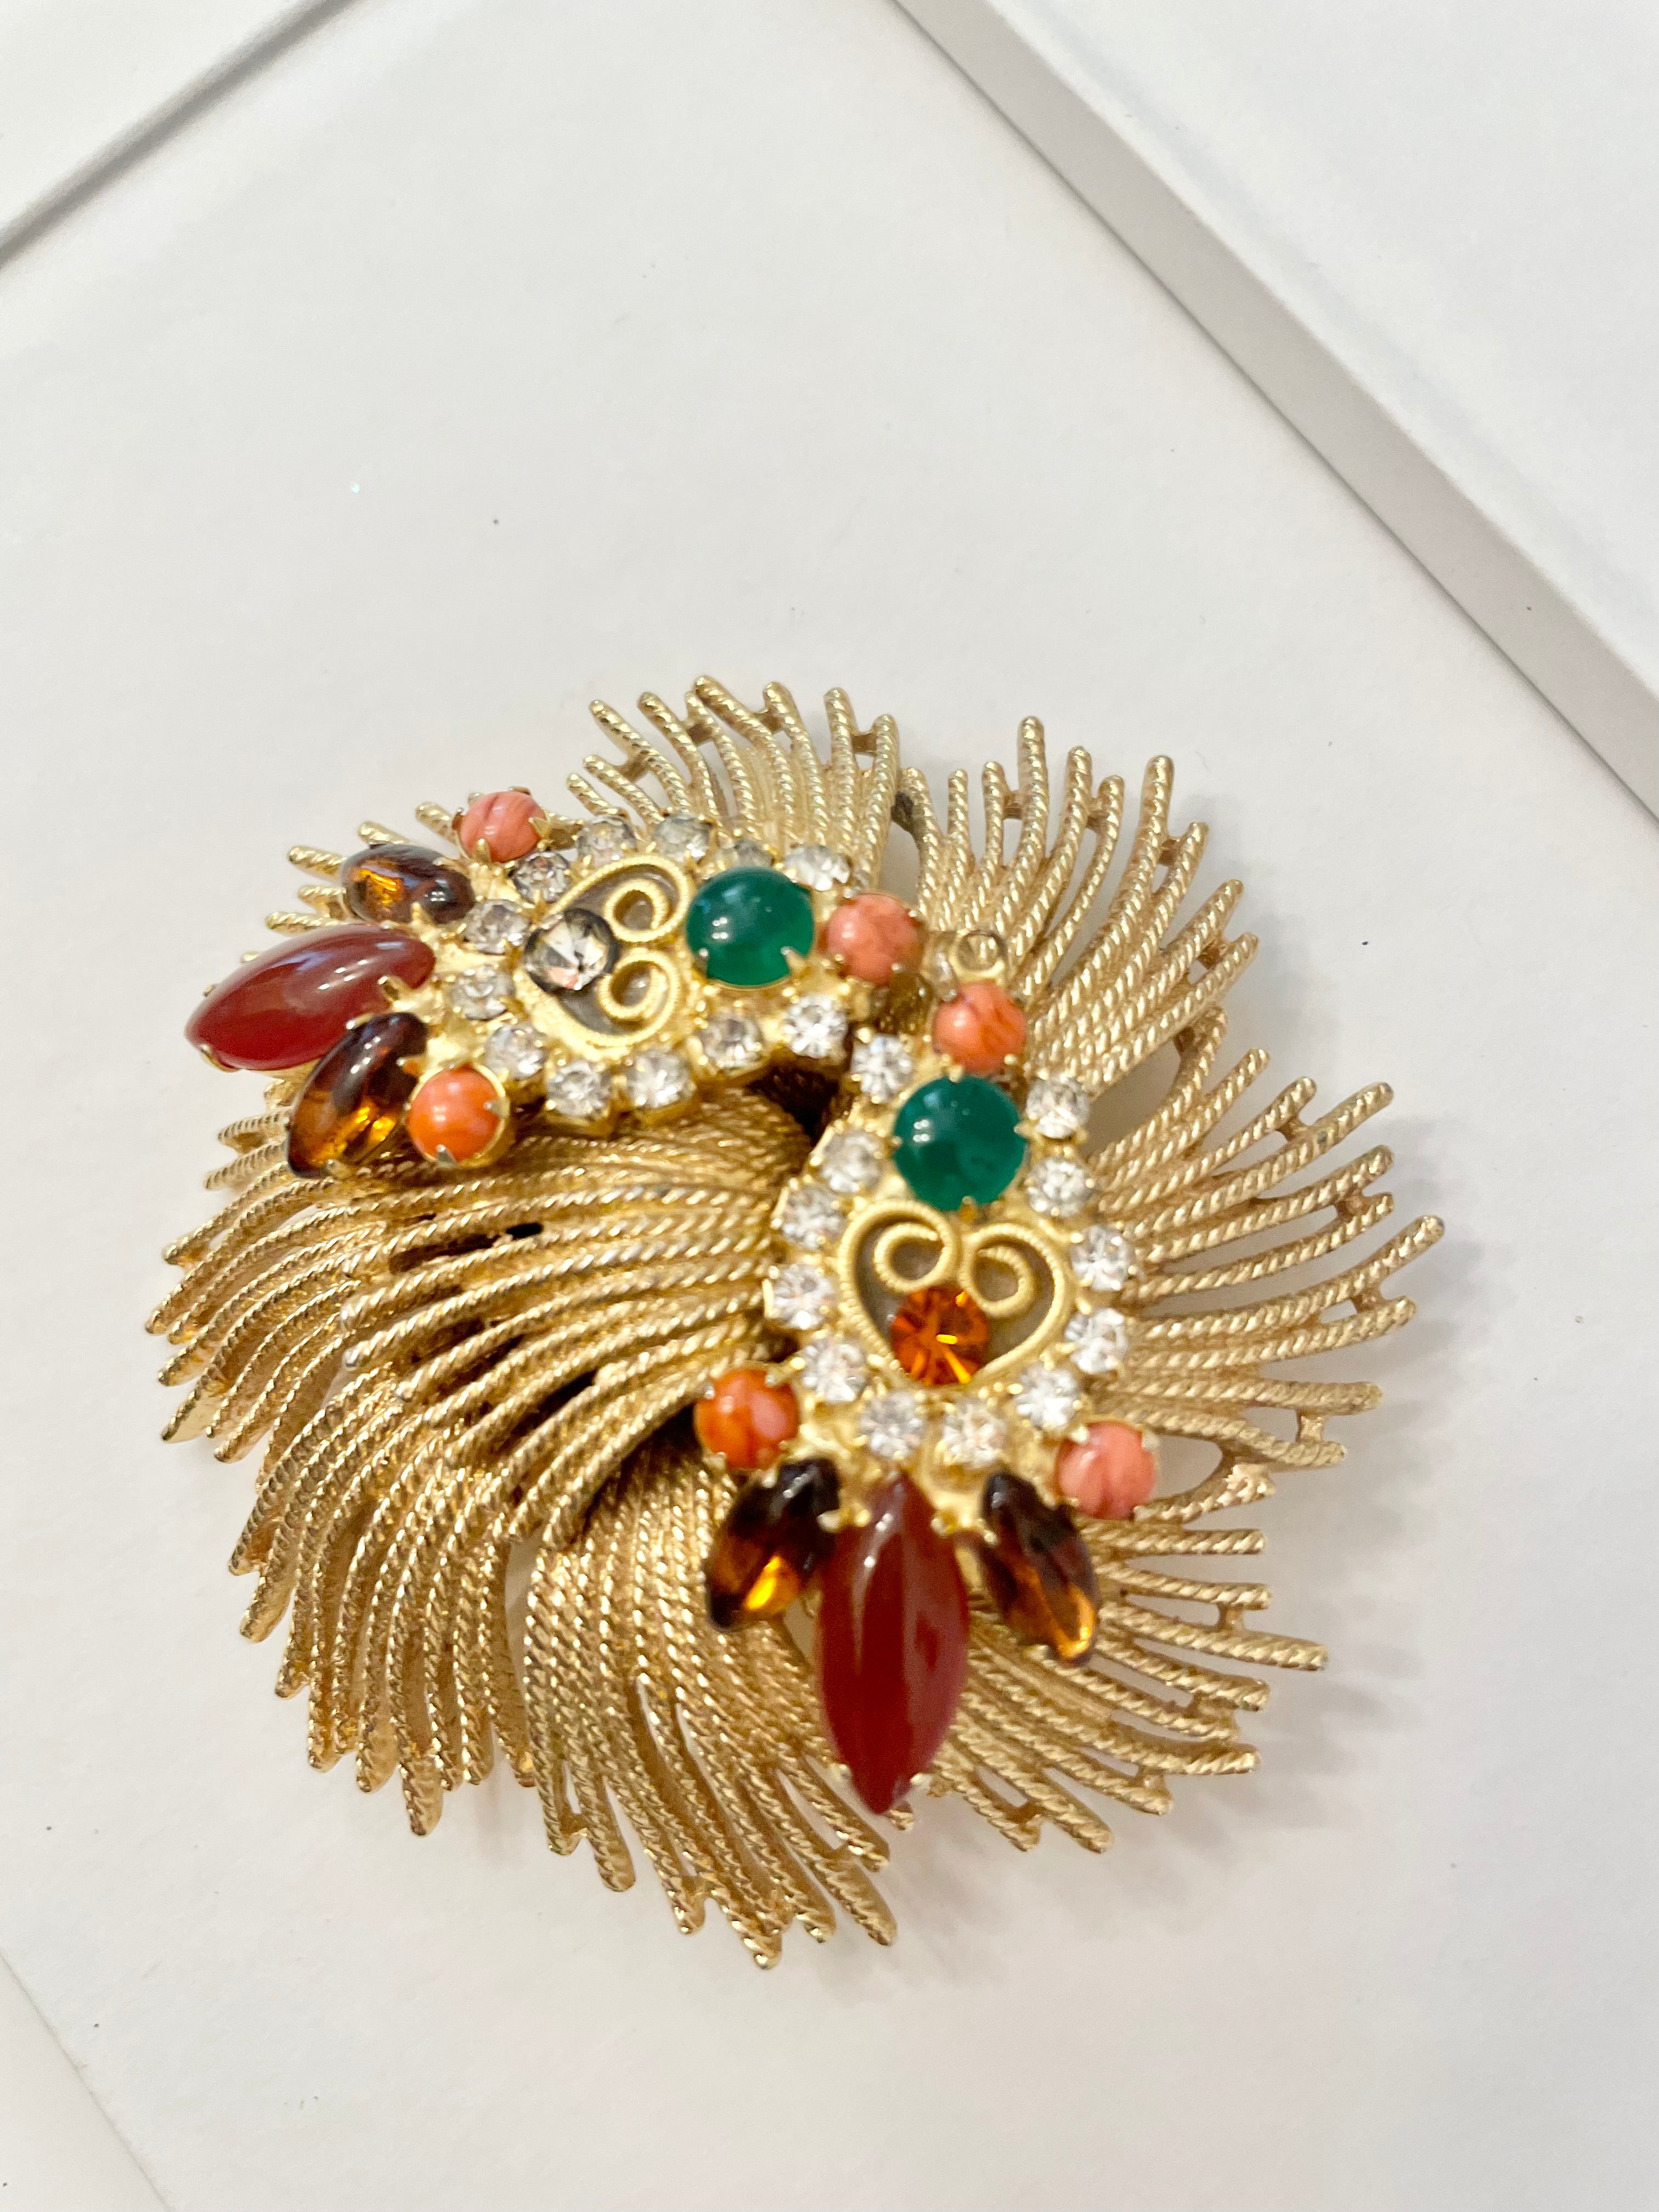 A beautiful rich gold brooch, adorned with the most exquisite color story, coral, green, and carnelian! so chic